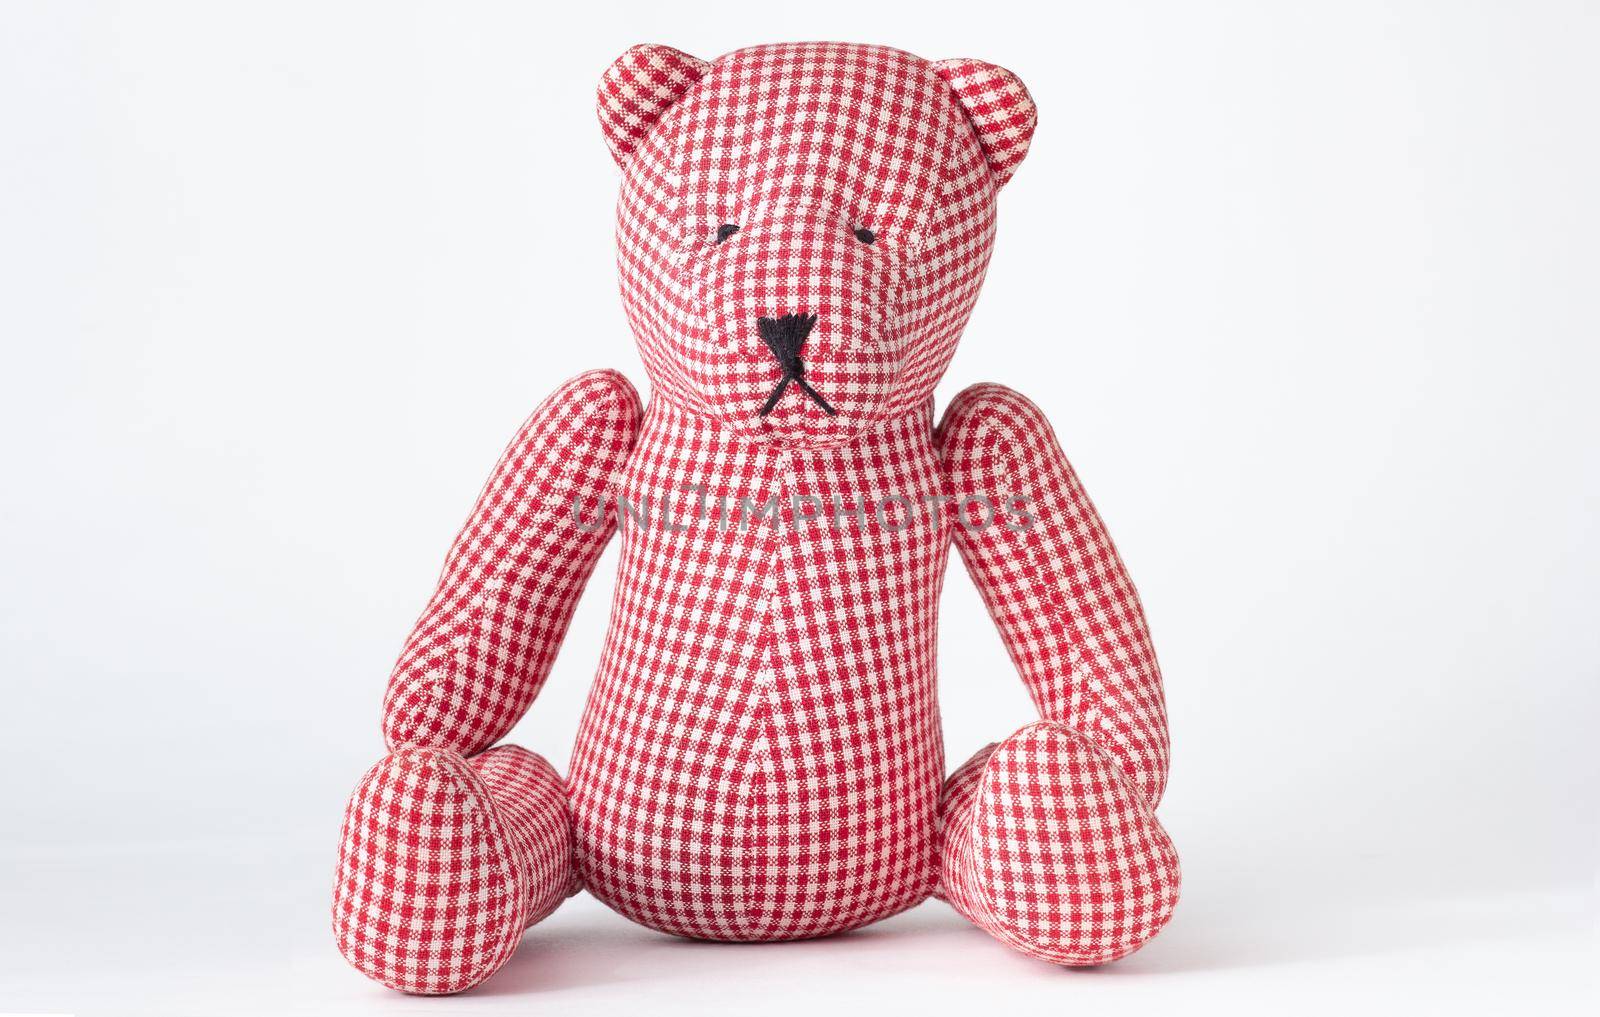 Isolated handmade check drapery red and white teddy bear toy made from plaid material on white background